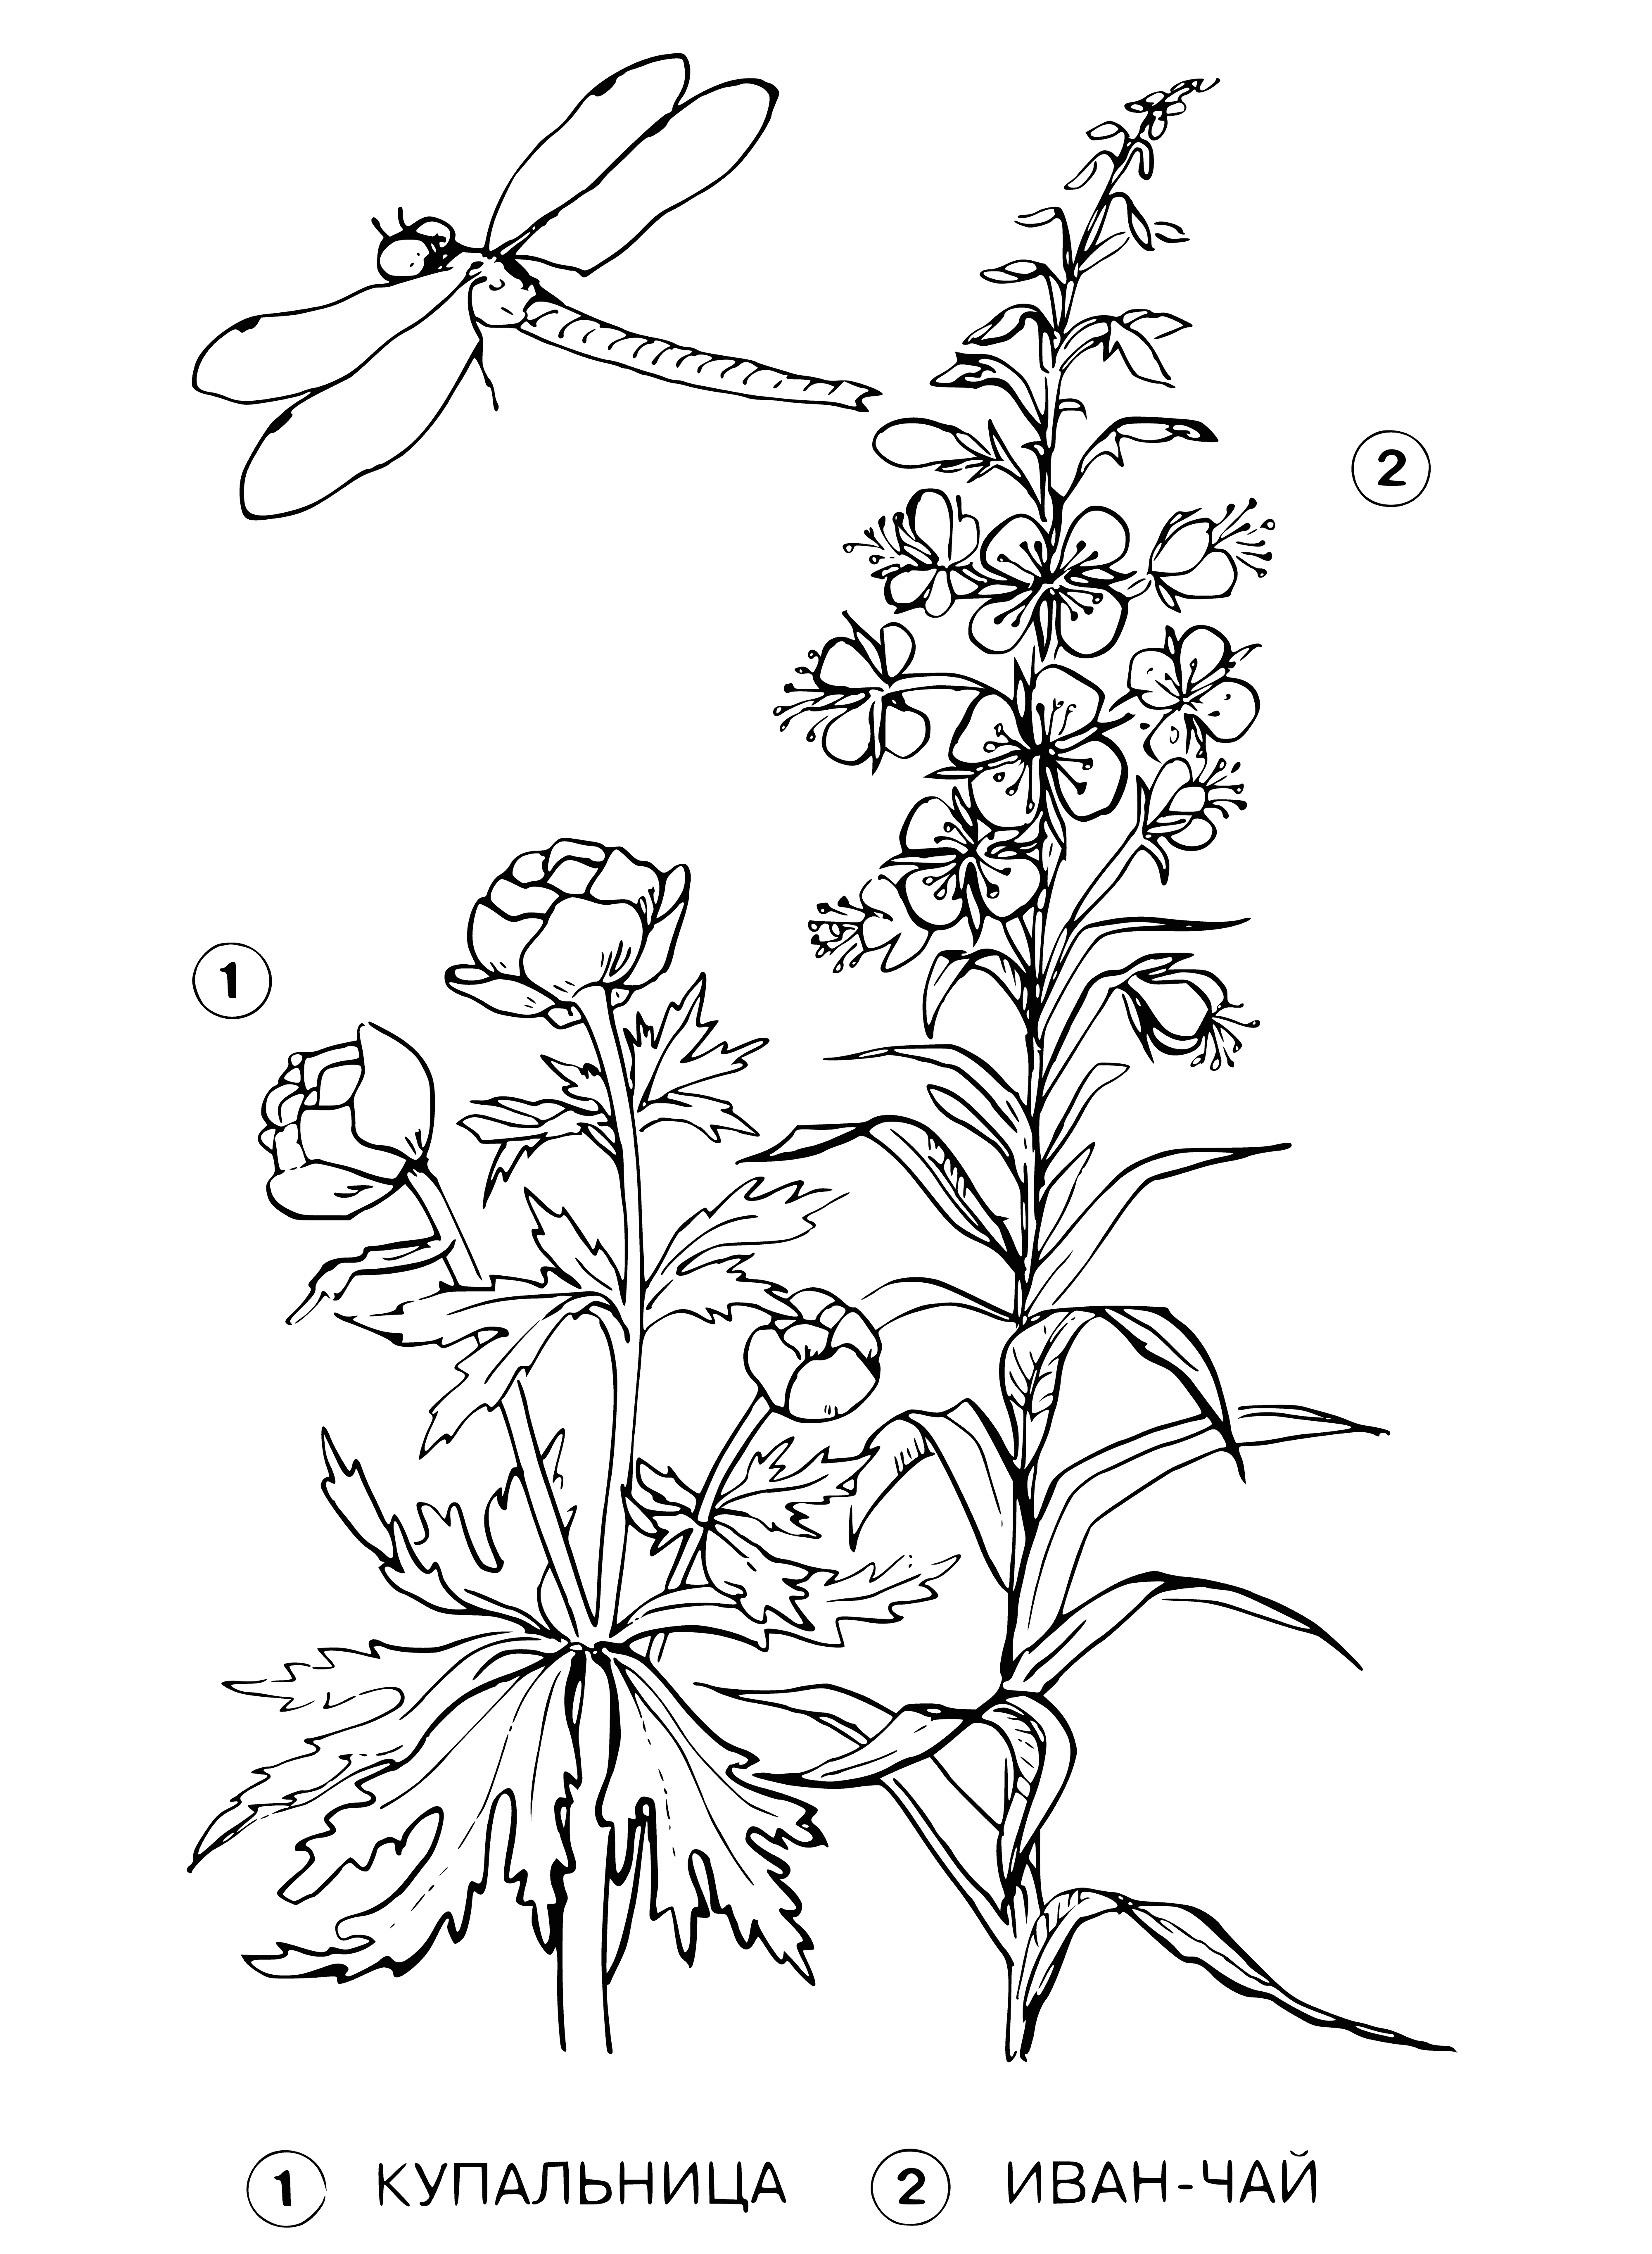 Bather and ivan tea coloring page